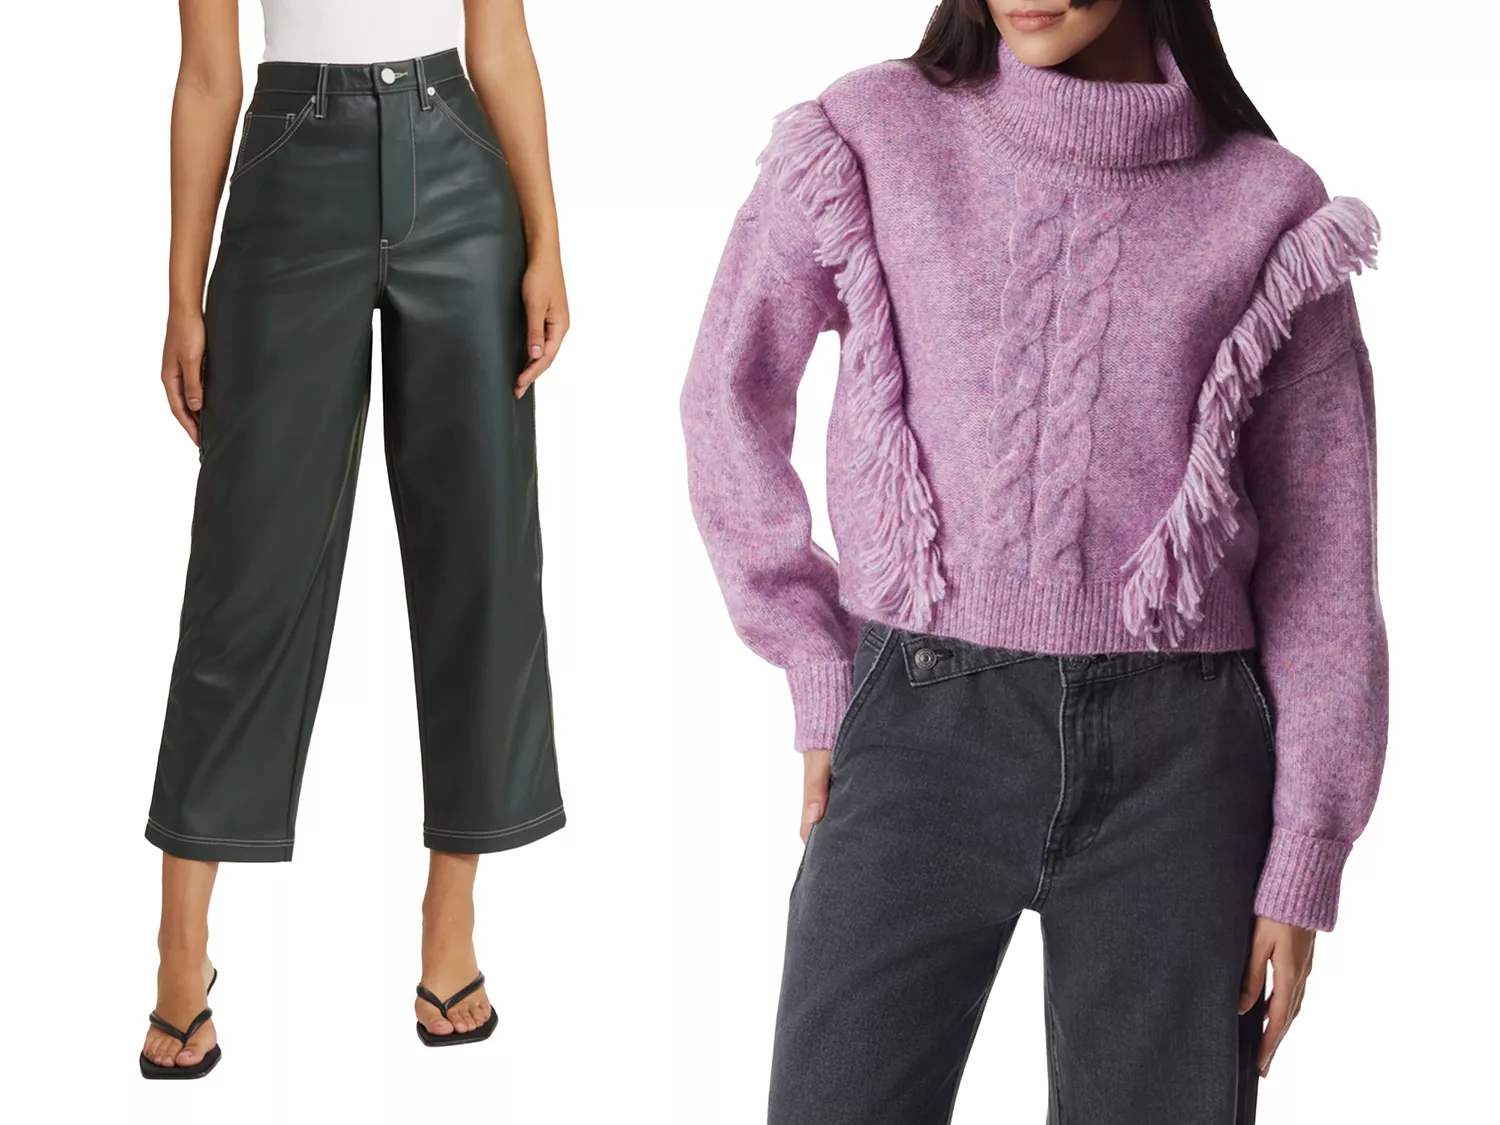 I Budgeted to Spend $300 at Nordstrom, and I’m Buying These 7 Under-$50 Fashion Finds